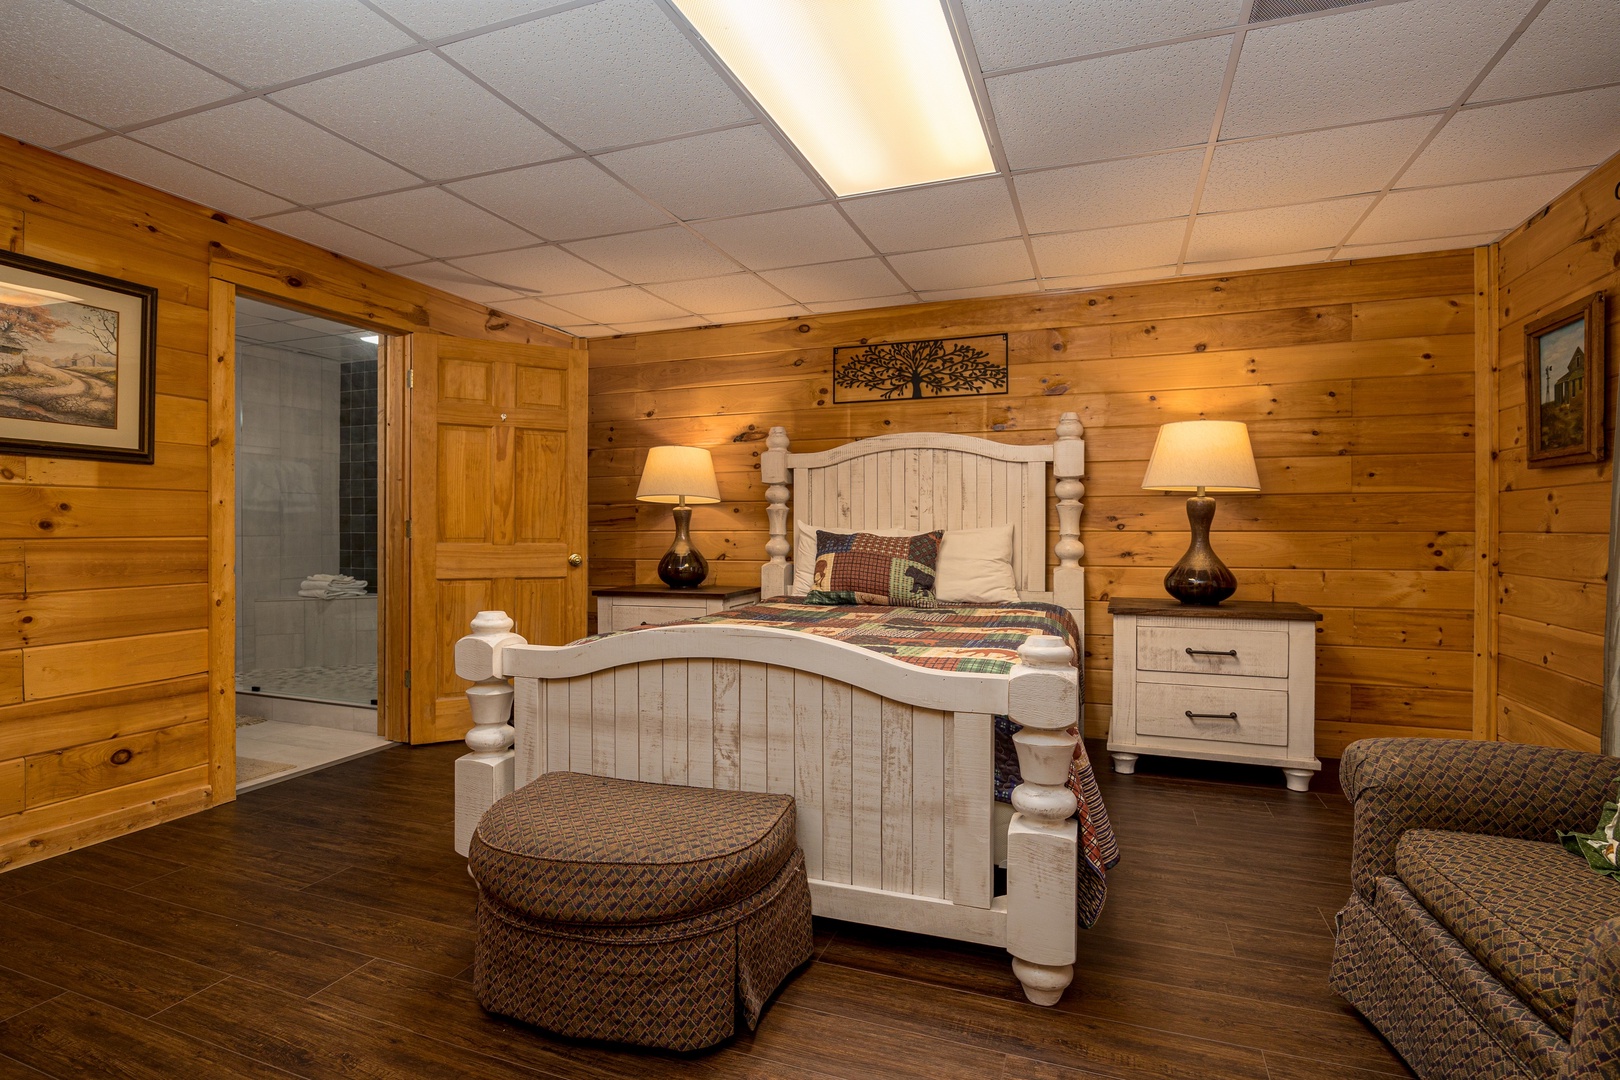 Bedroom with bathroom attached at Fox Ridge, a 3 bedroom cabin rental located in Pigeon Forge